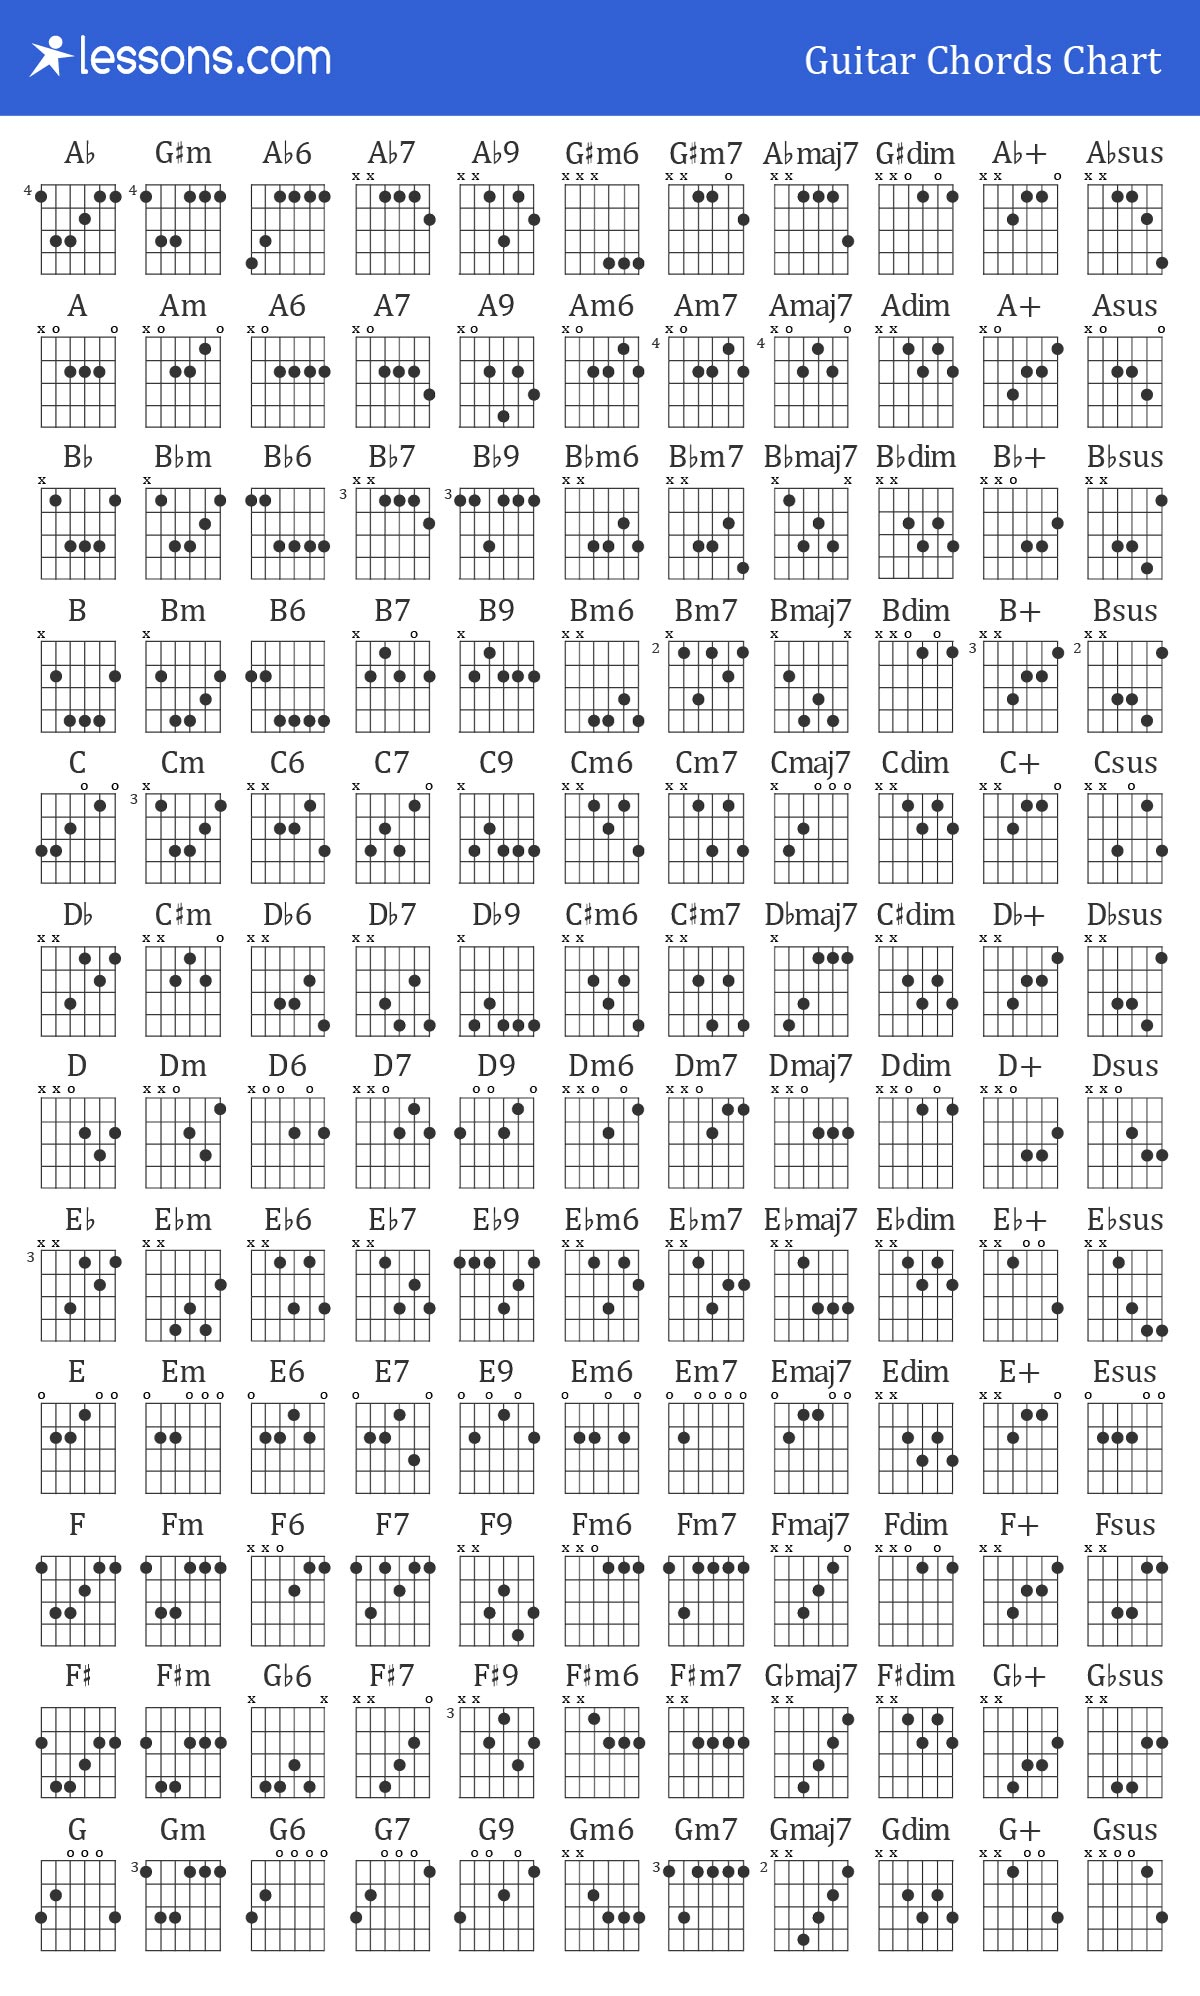 Chords On Guitar The 100 Best Guitar Chords Chart Beginner To Advanced